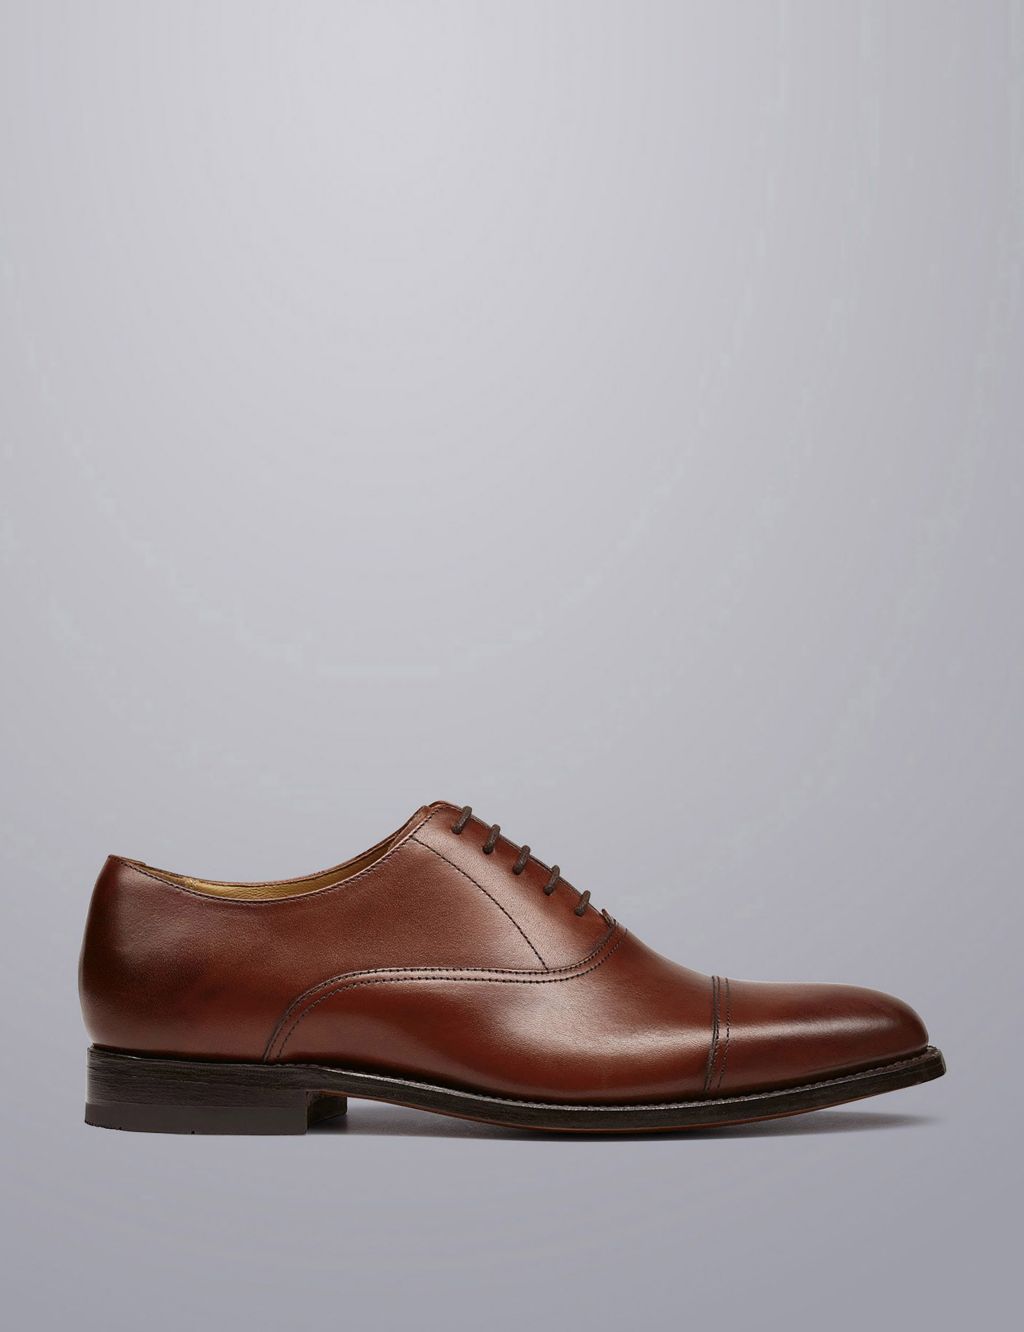 Leather Oxford Shoes 1 of 1